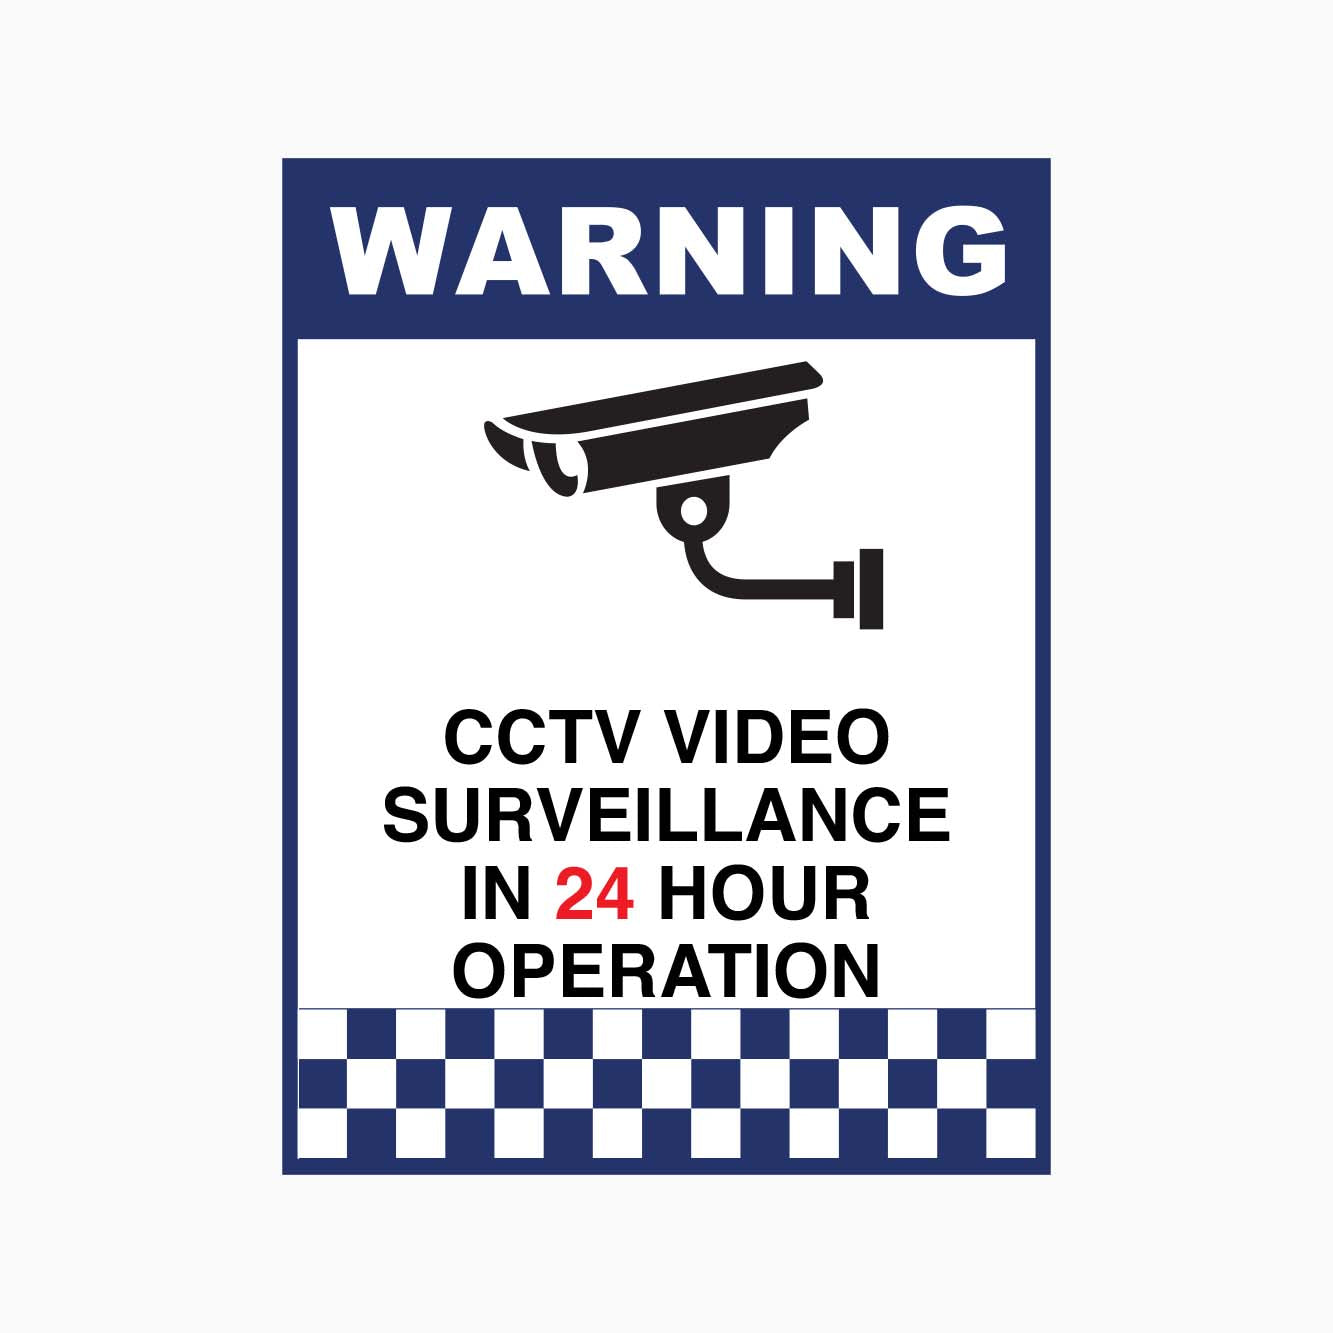 WARNING CCTV SURVEILLANCE IN 24 HOUR OPERATION SIGN - GET SIGNS